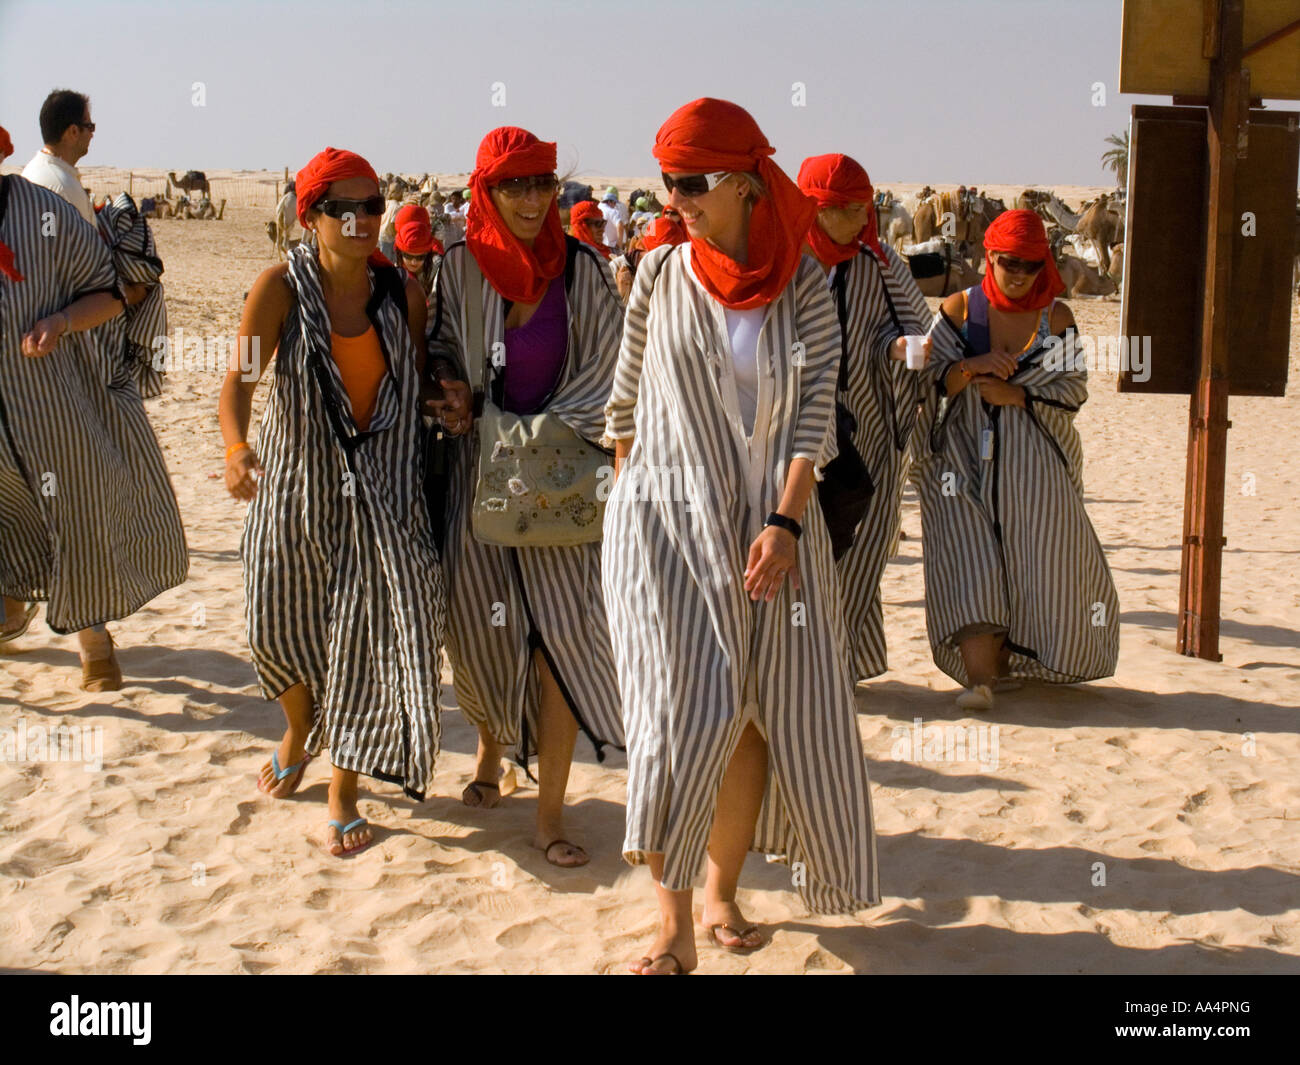 Young women in protective red turbans and robes after camel trekking Sahara Desert near Douz Tunisia Stock Photo